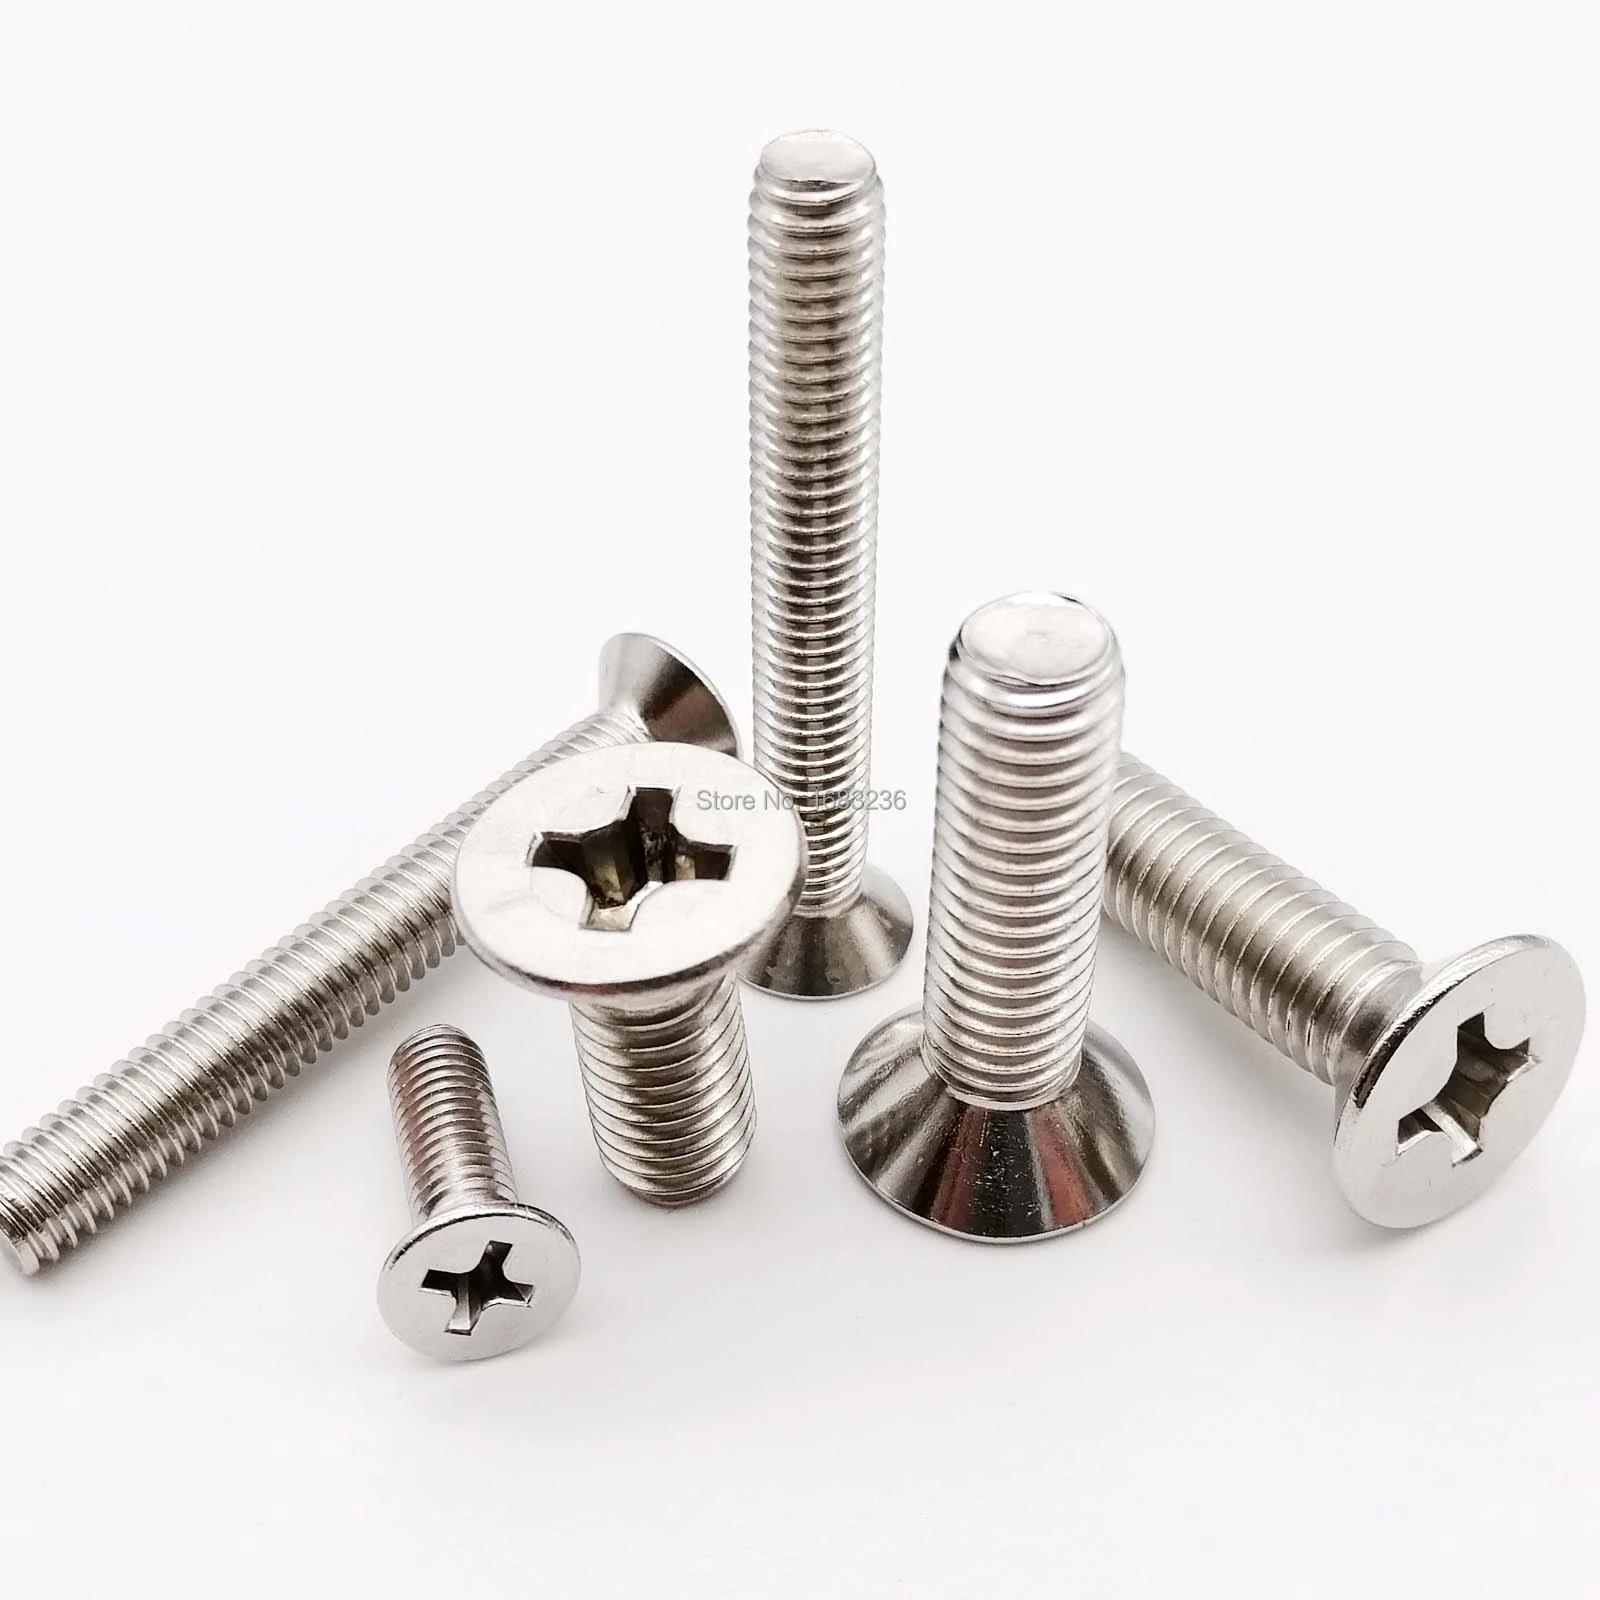 Stainless A2 Phillps Screws M6 Multi Listing